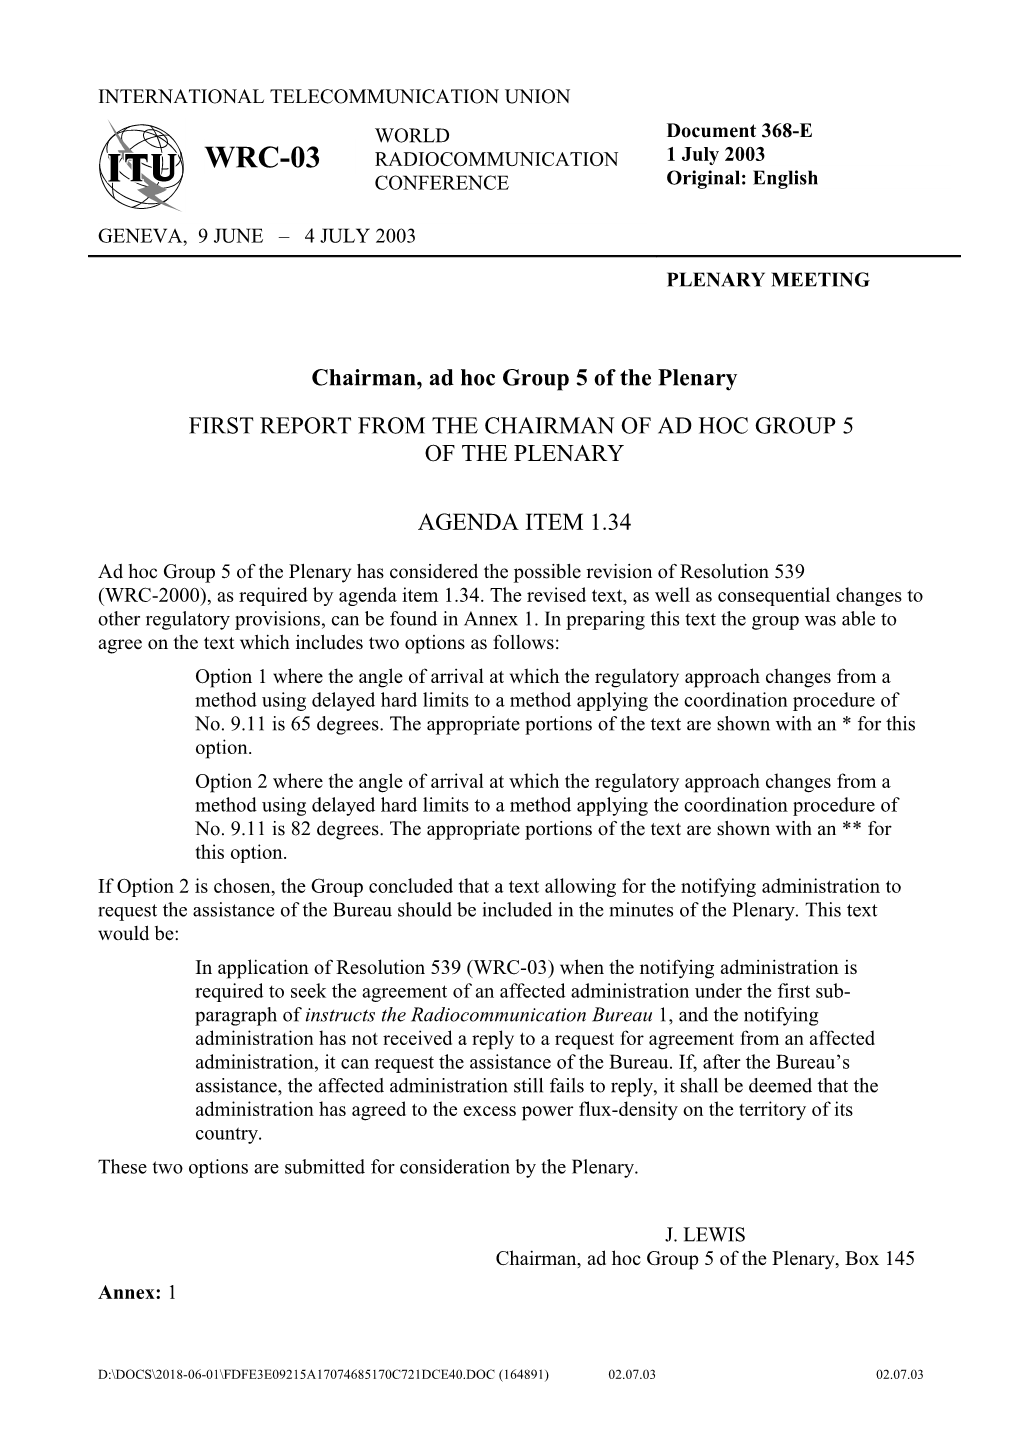 First Report from the Chairman of Ad Hoc Group 5 of the Plenary: Agenda Item 1.34